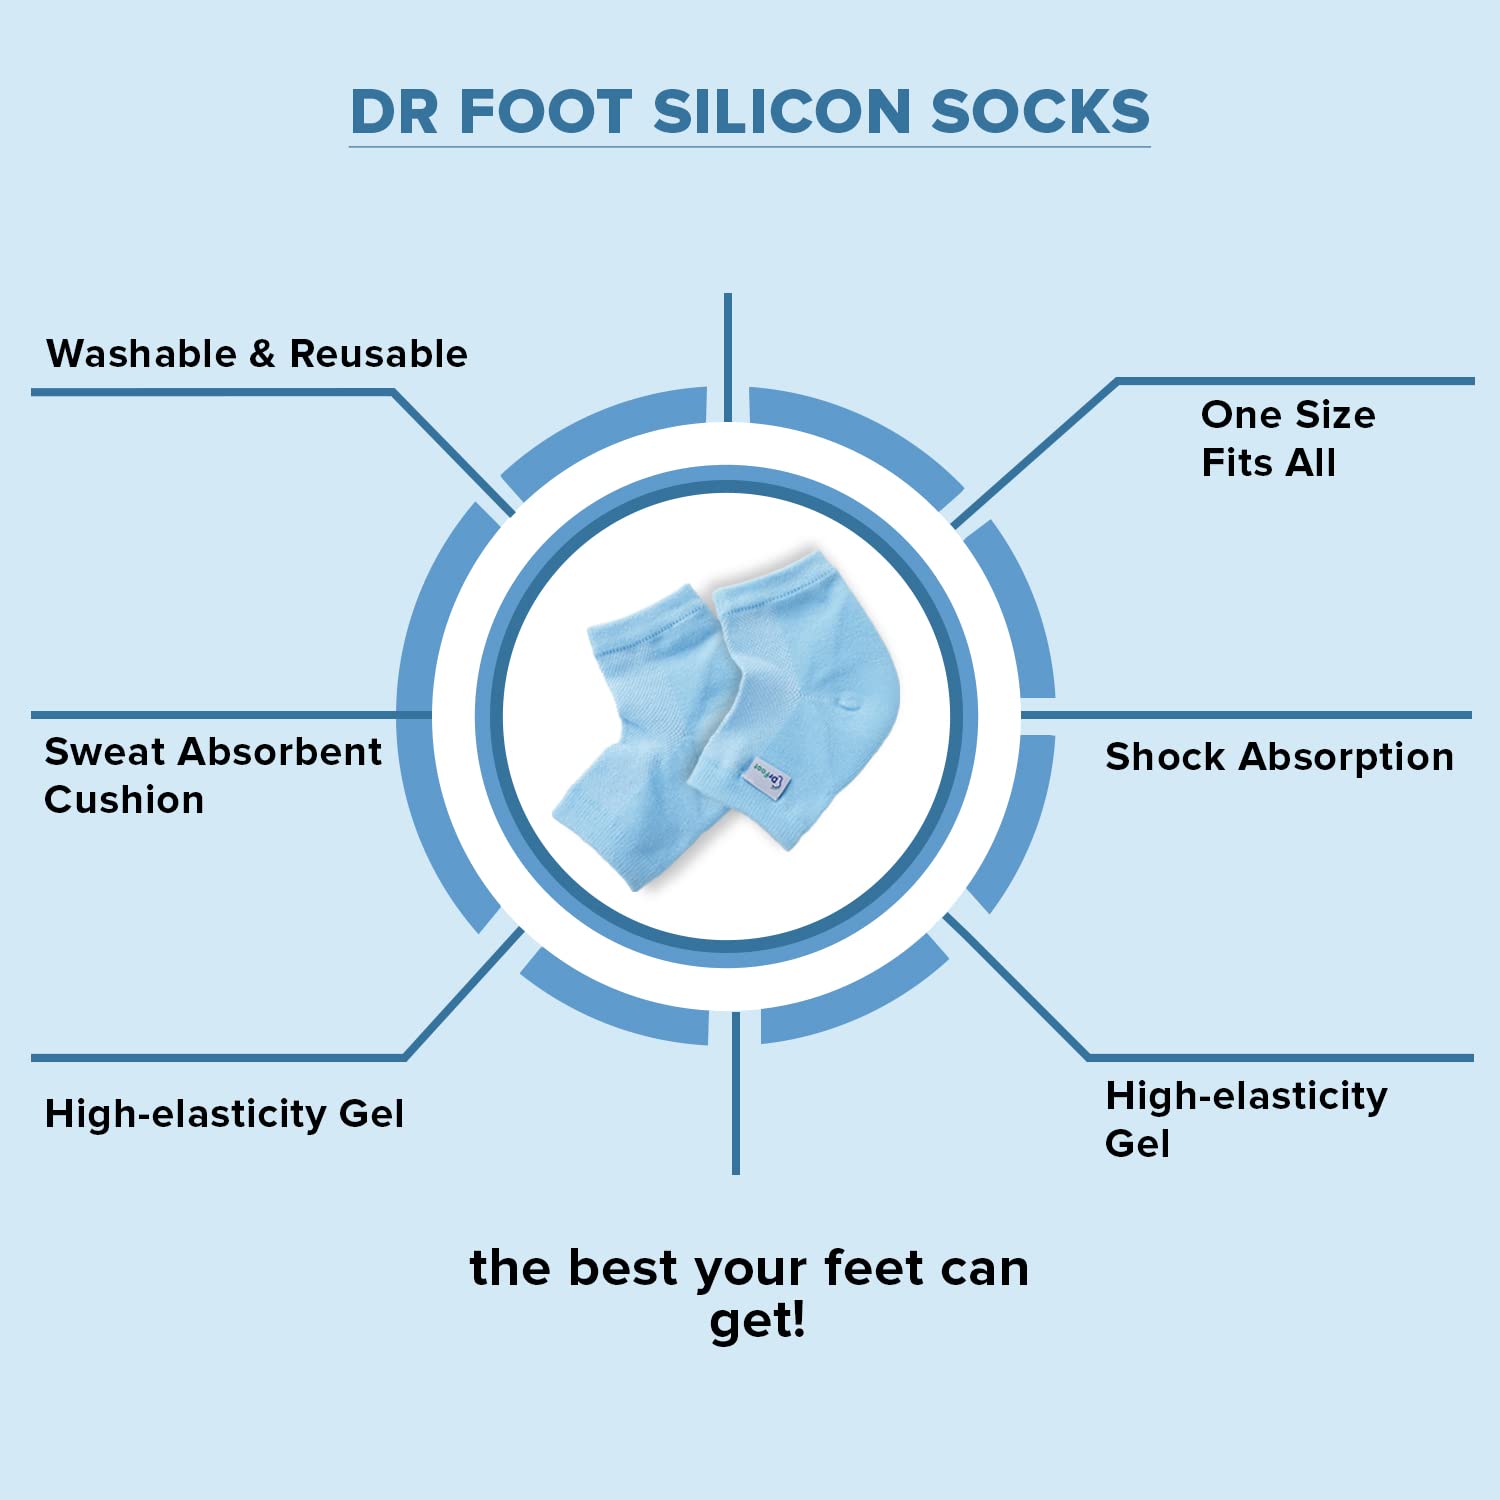 Dr Foot Silicone Gel Heel Socks |Silicone Gel Moisturizer Heel Sleeves To Smooth & Soften Rough Cracked Heels & Dry Feet Or Irritated Heels| For Men & Women | Free Size – 1 Pair (Pack of 2)